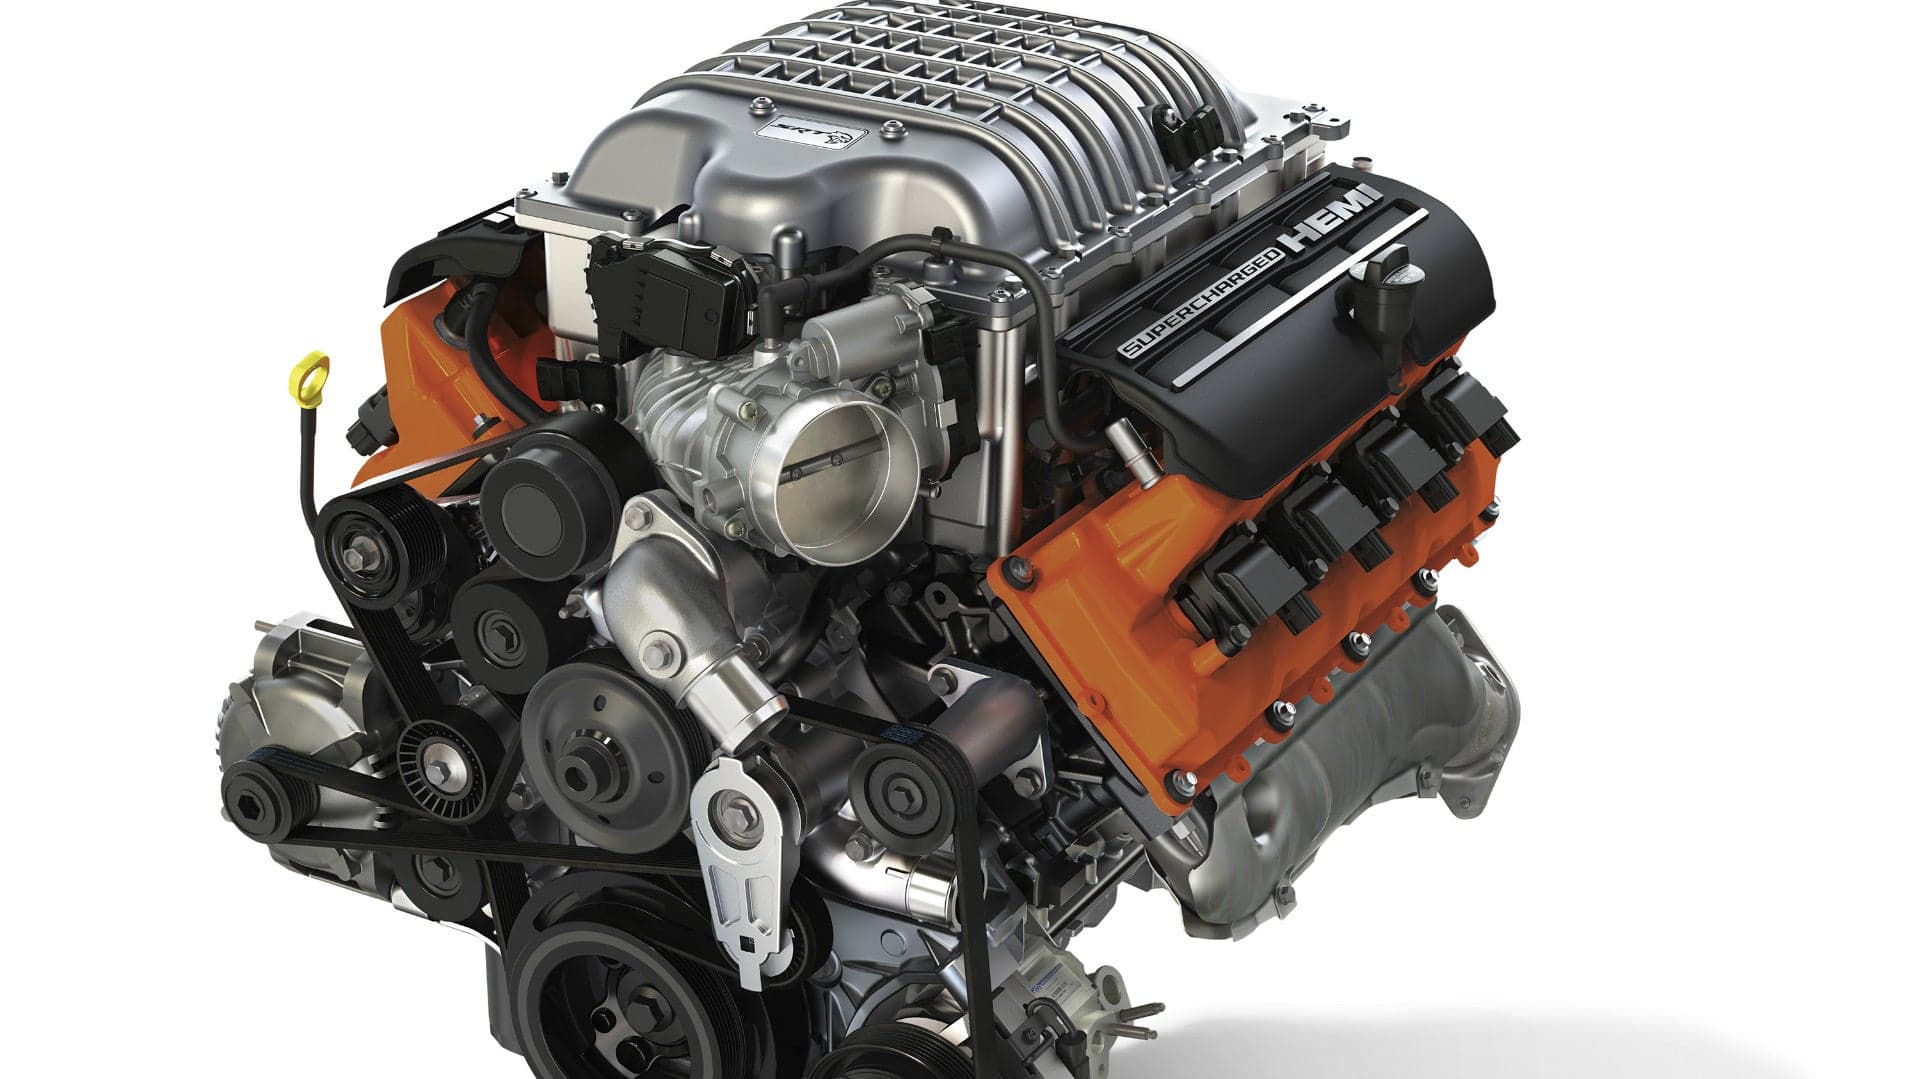 Dodge to Offer 707 Horsepower ‘Hellcrate’ Engine at Last